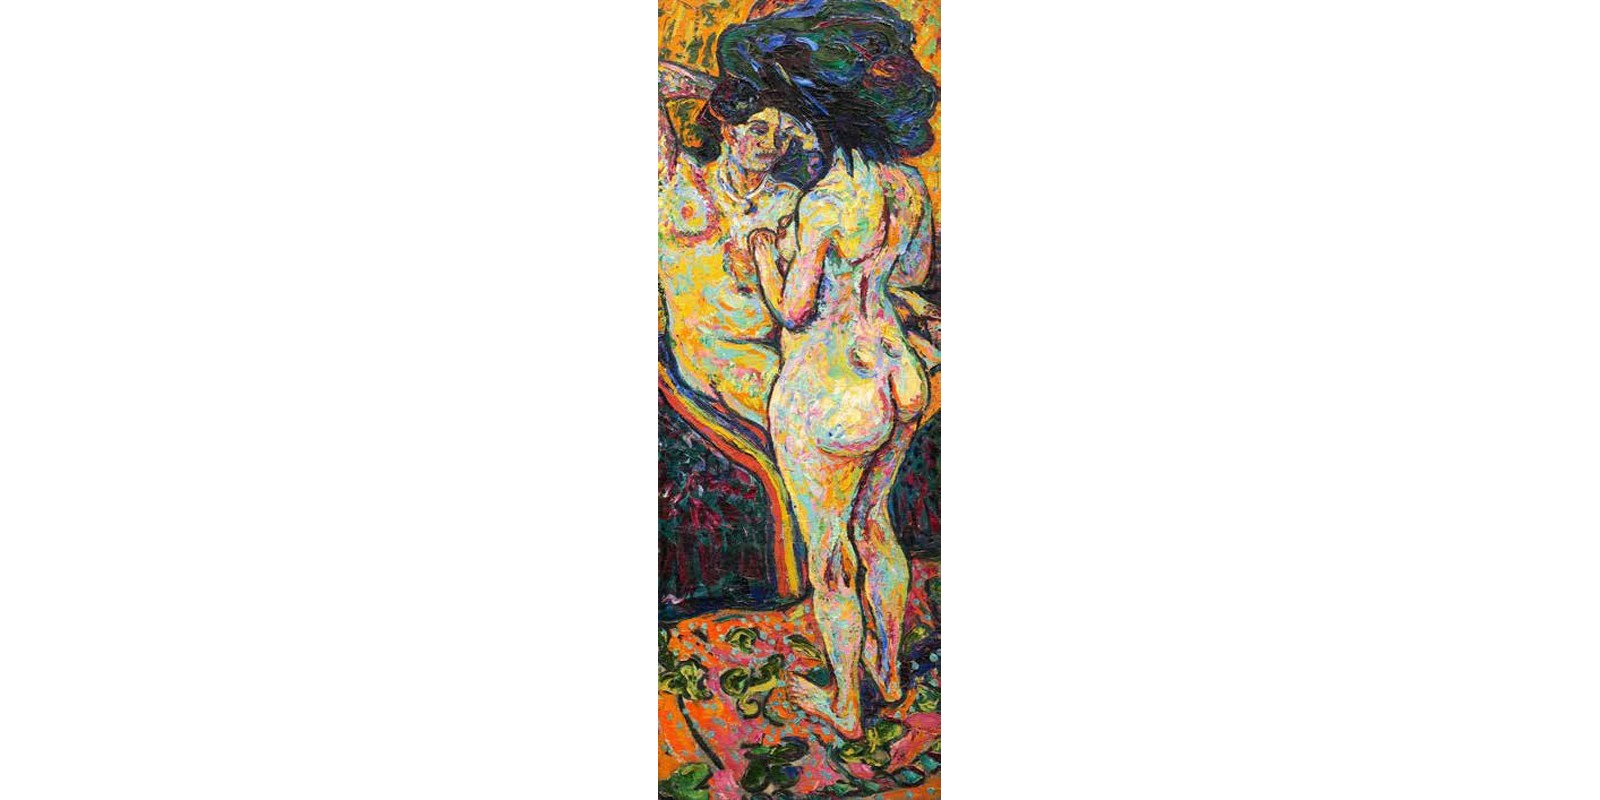 Ernst Ludwig Kirchner - Two Nudes